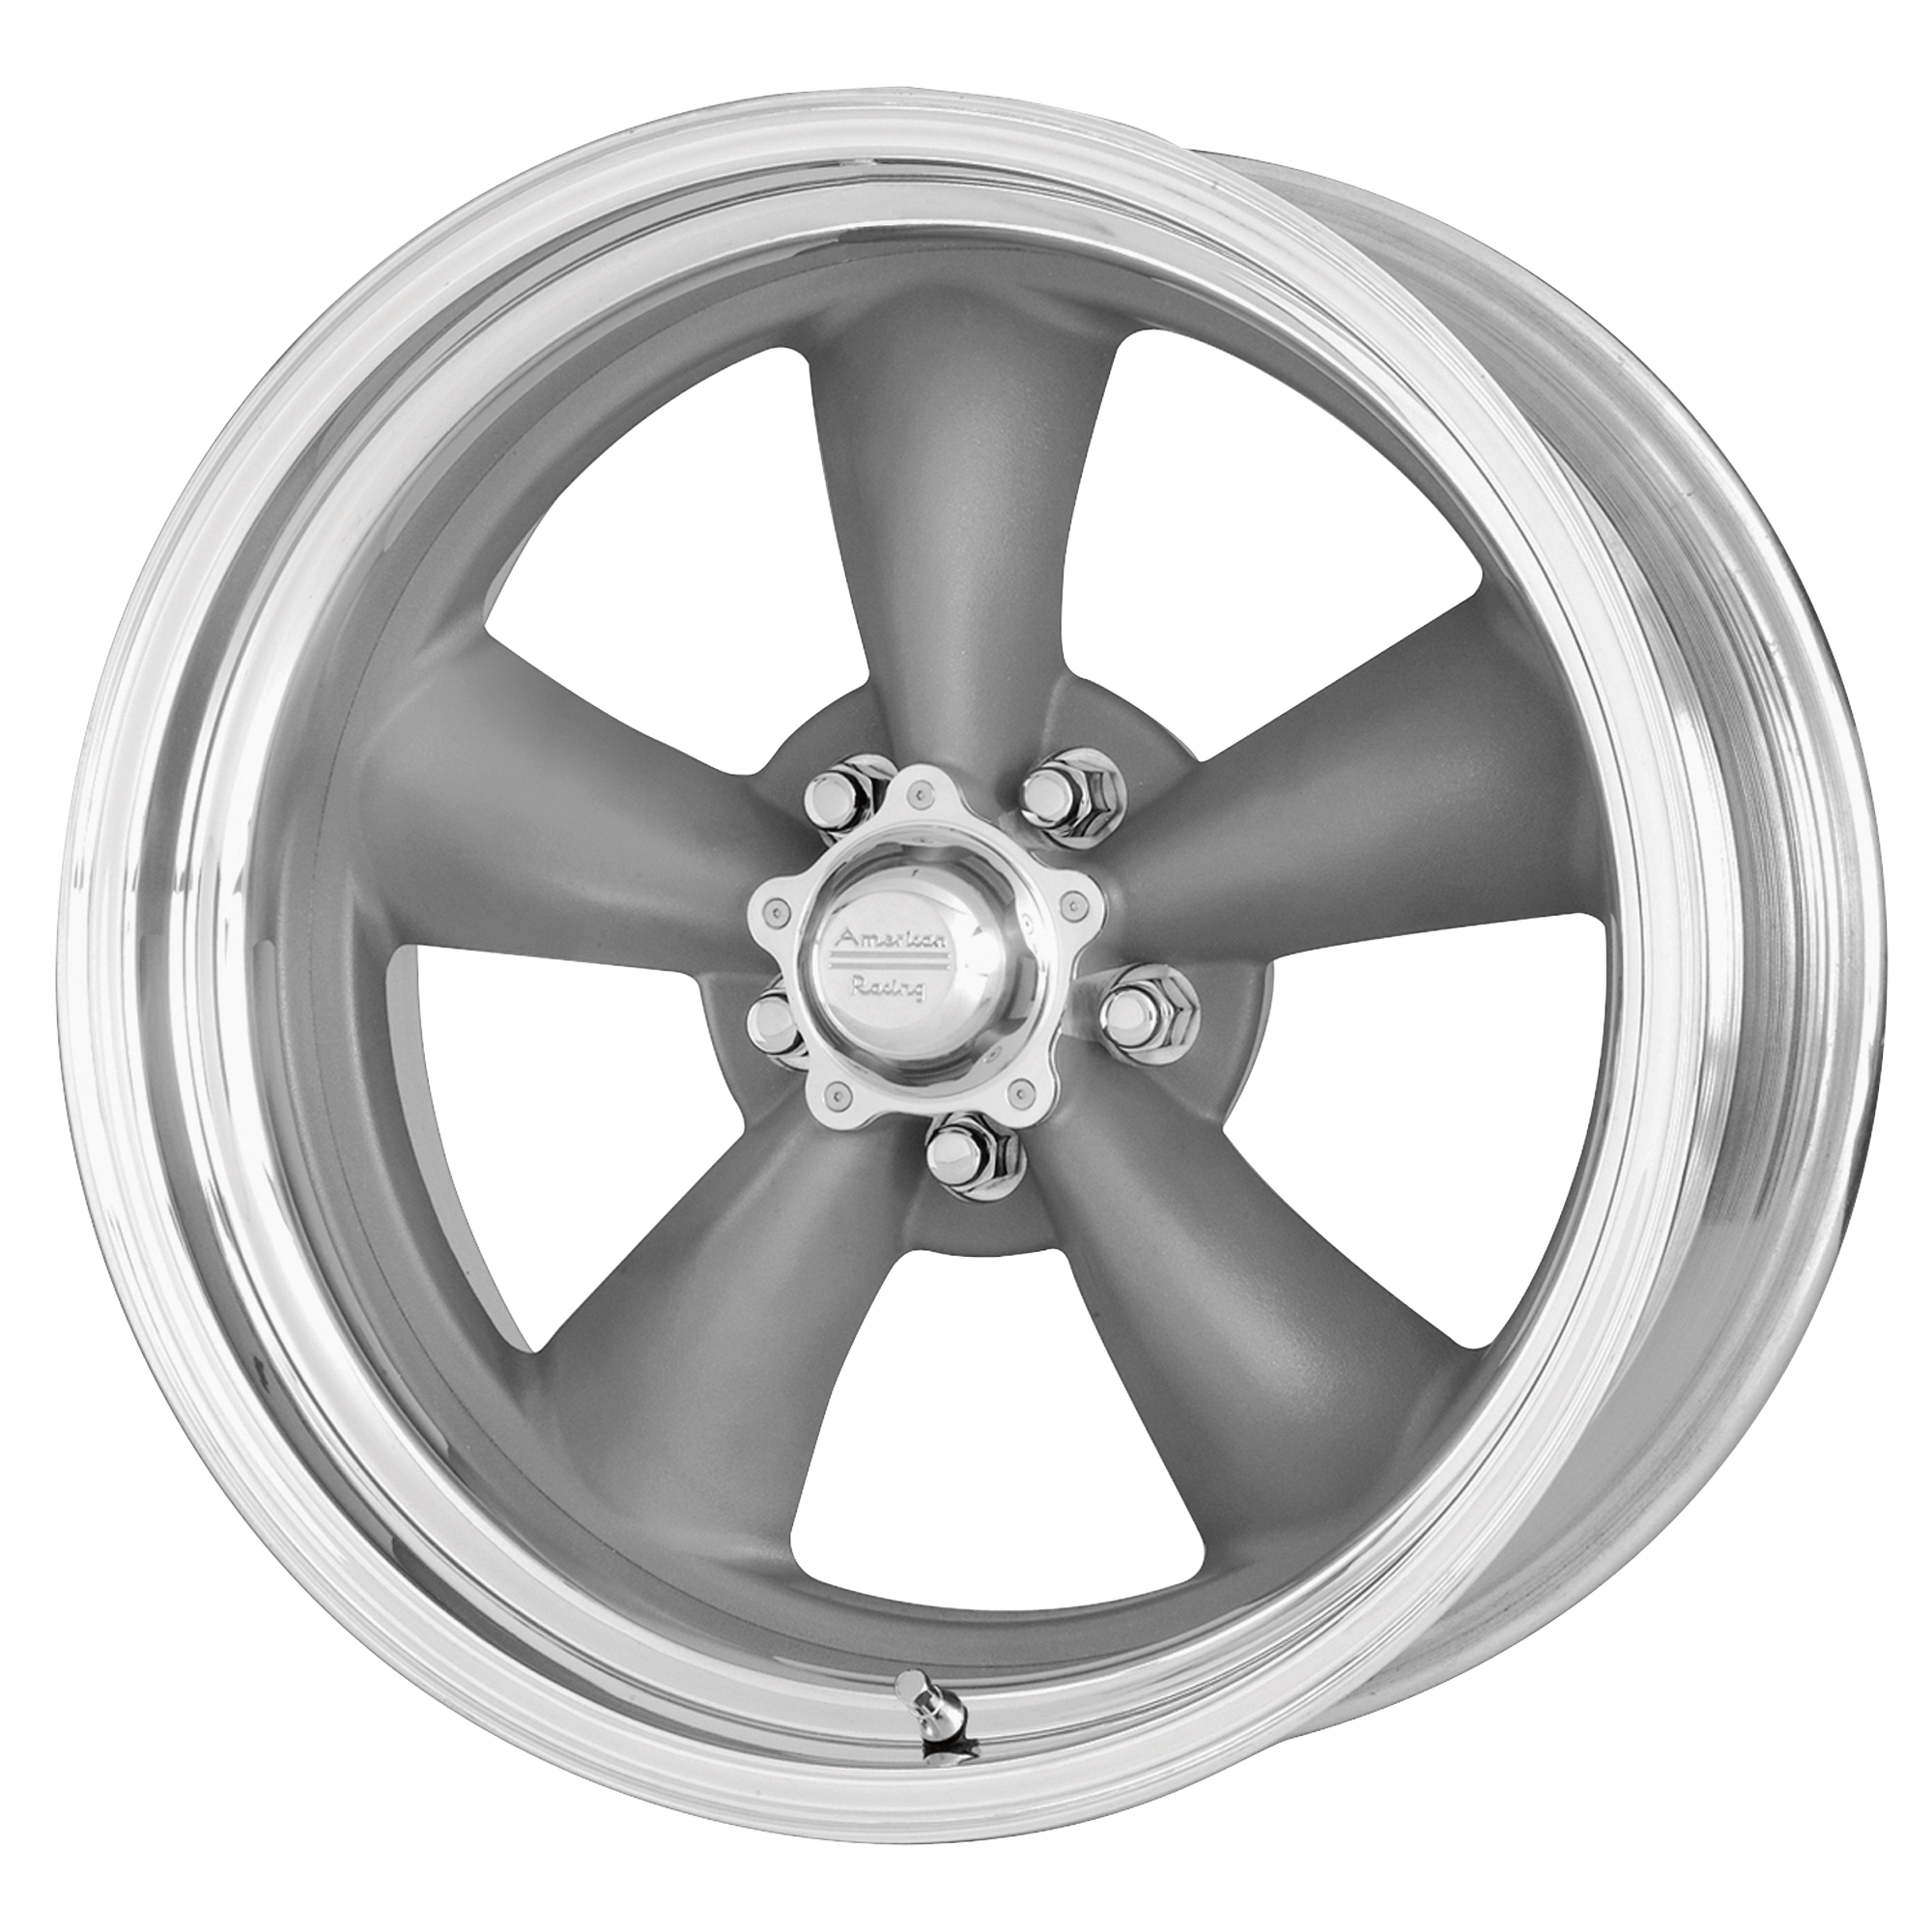 CLASSIC TORQ THRUST II ONE PIECE 20x10 5x120.65 MAG GRAY W/ MACHINED LIP (6 mm) - Tires and Engine Performance